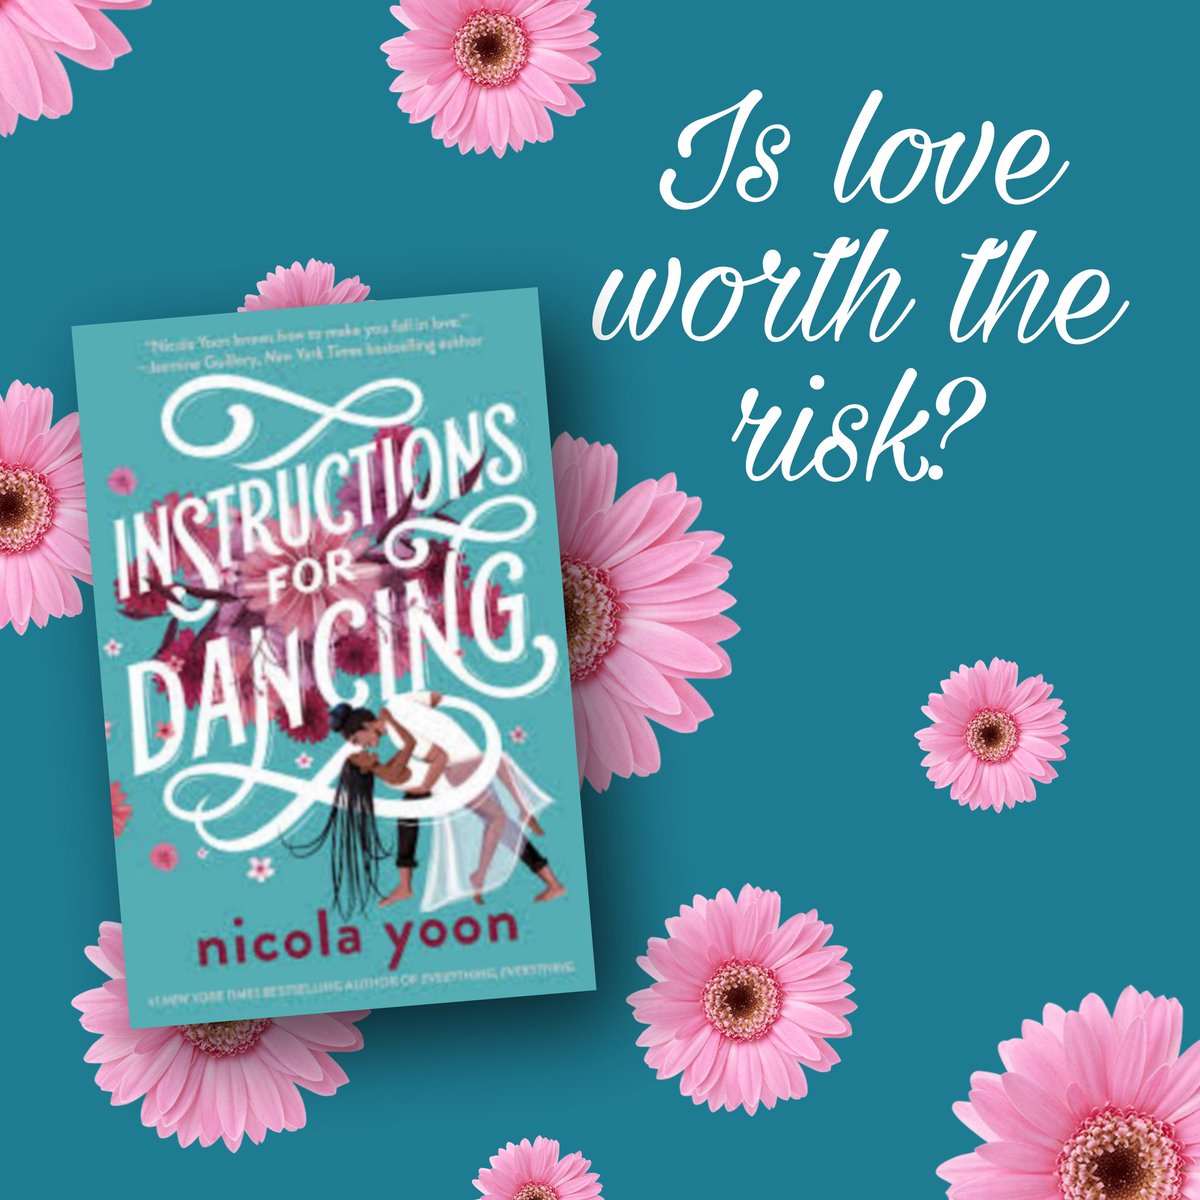 Do you believe in love? Evie doesn't - even the greatest love stories end in heartbreak. But then she meets X. He's unreserved & passionate &... she's falling for him. Is falling in love worth the risk of heartbreak? 
#bnmidwest #books #yabooks #nicolayoon #yaromance #yathursday